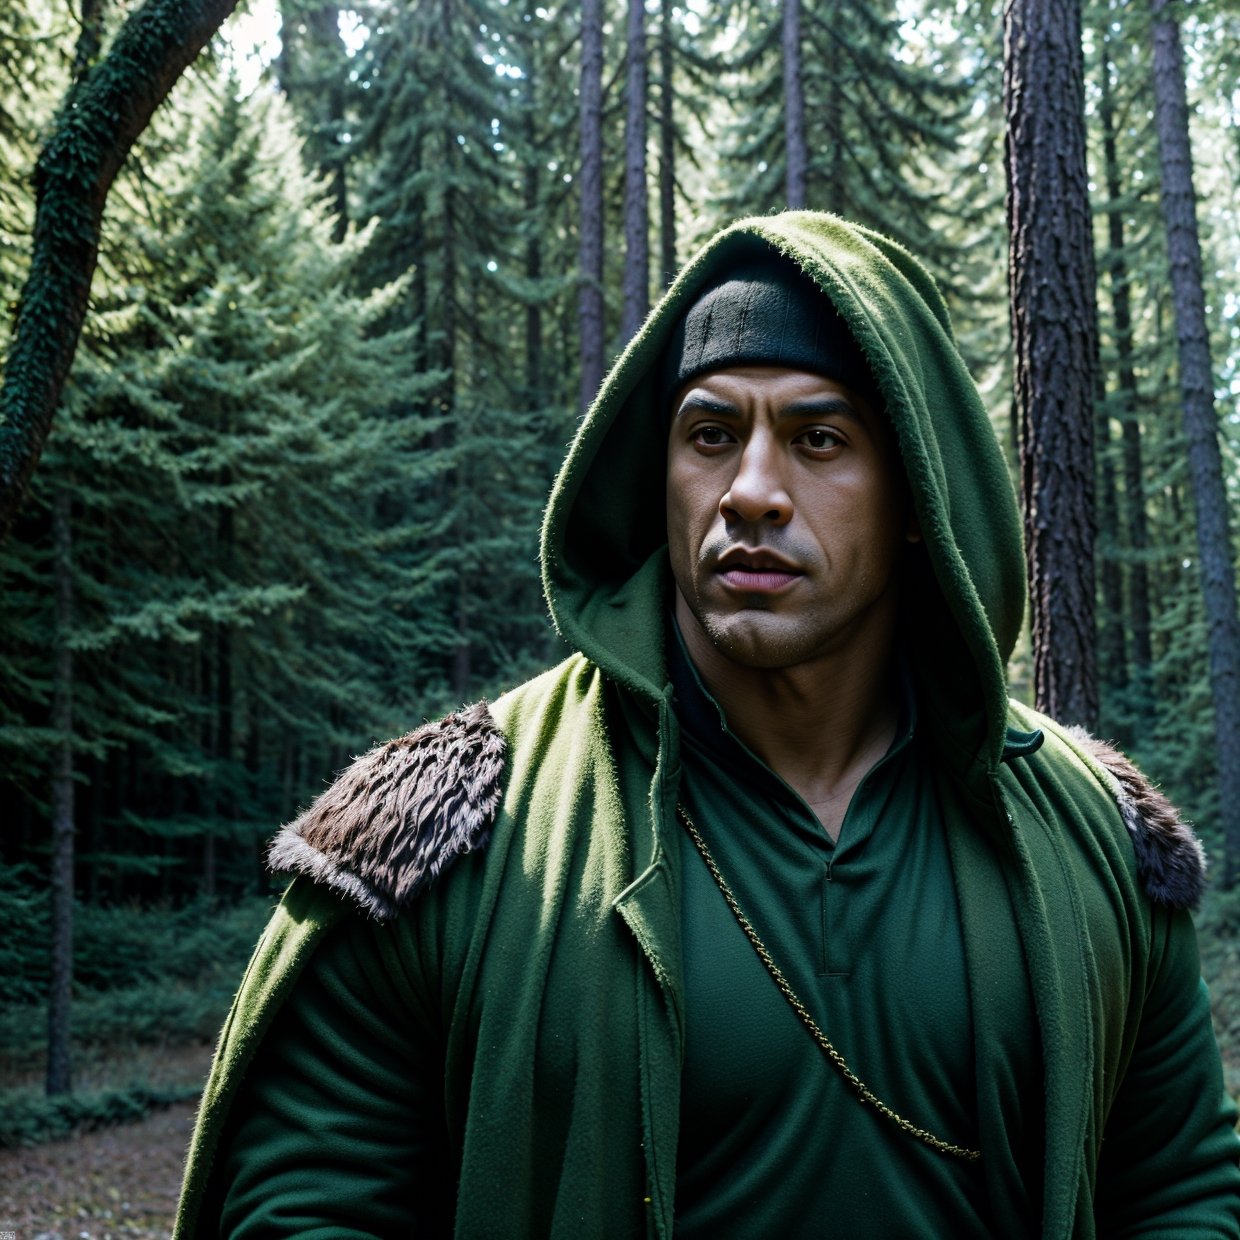 Arafed The Man in the Green Jacket in the Woods, Vin Diesel, Hero, Epic Fantasy as a Medieval Fantasy Character, Portrait of Fin the Wild Cloak, Dwayne Johnson as Harry Potter, Dominic Toretto, Fantasy Character Photo, Ronaldo Nazario, Profile Shot, Epic Fantasy D&D Hobbit Rogue